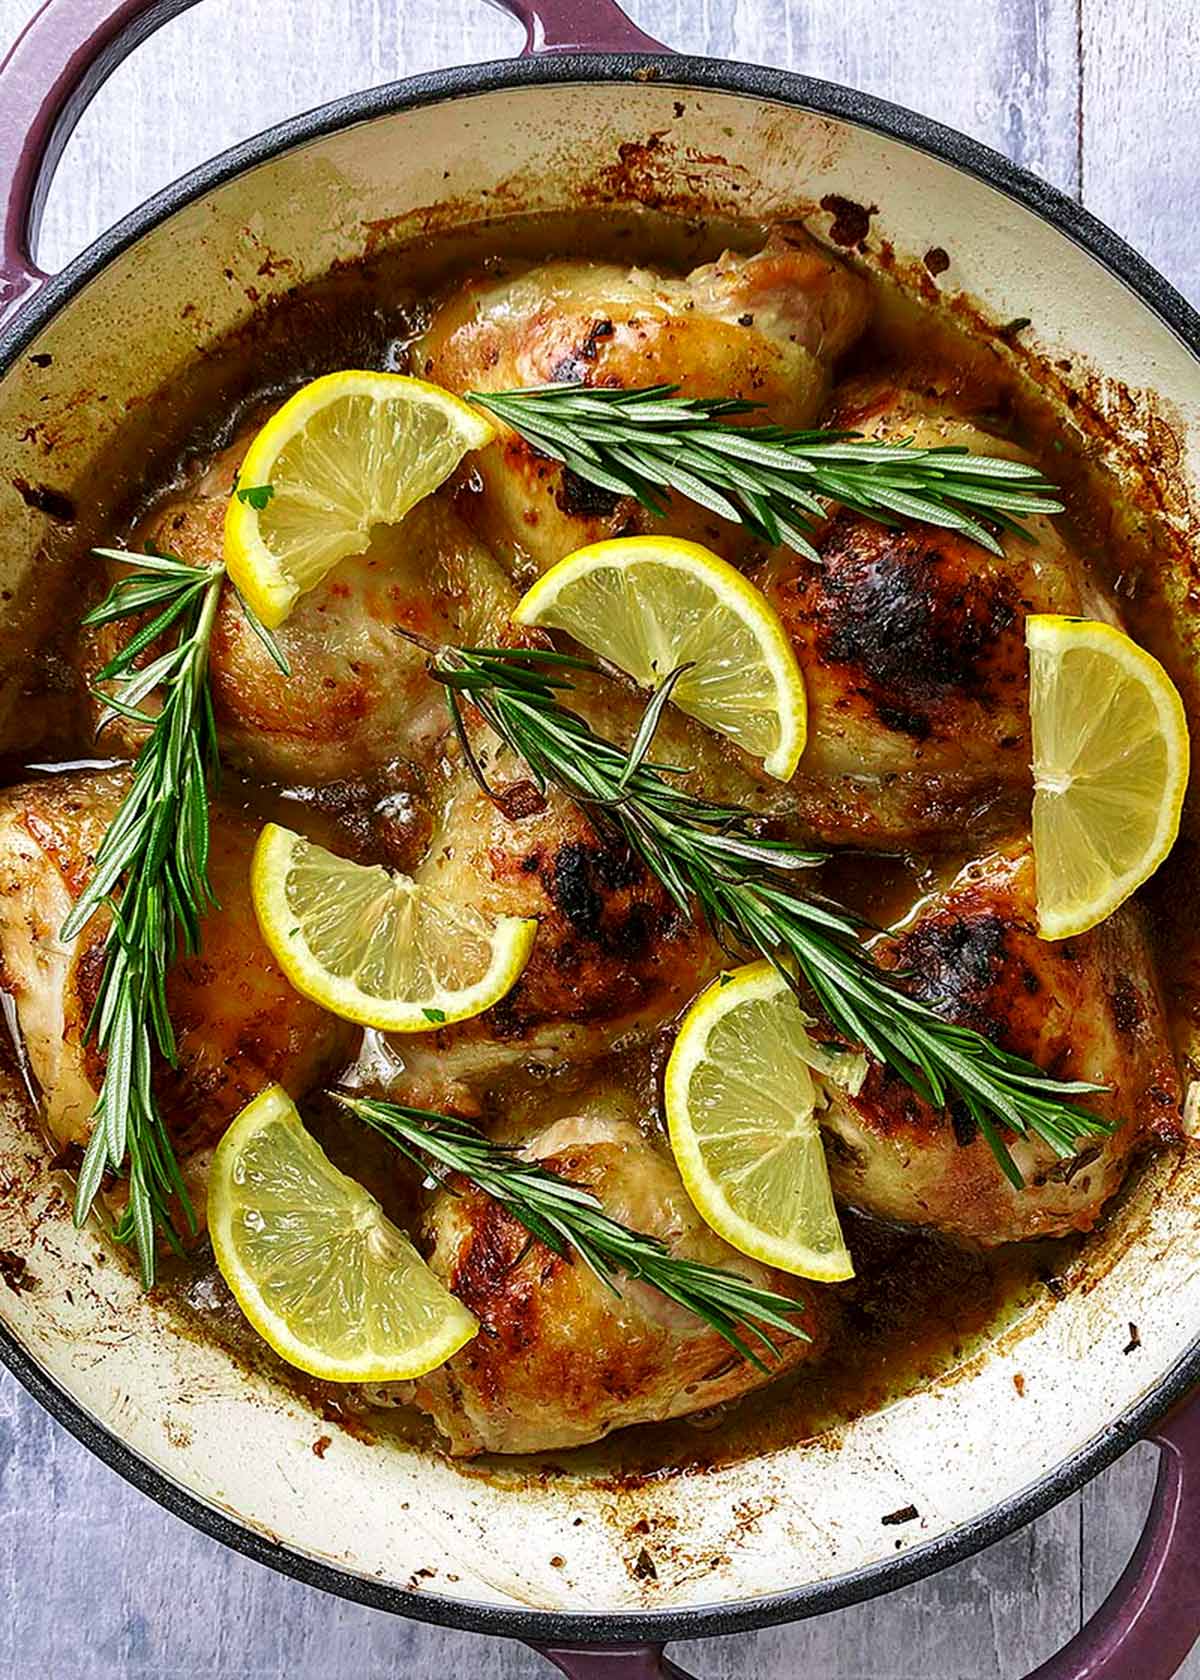 Cooked chicken thighs in a baking dish topped with lemon slices and sprigs of rosemary.